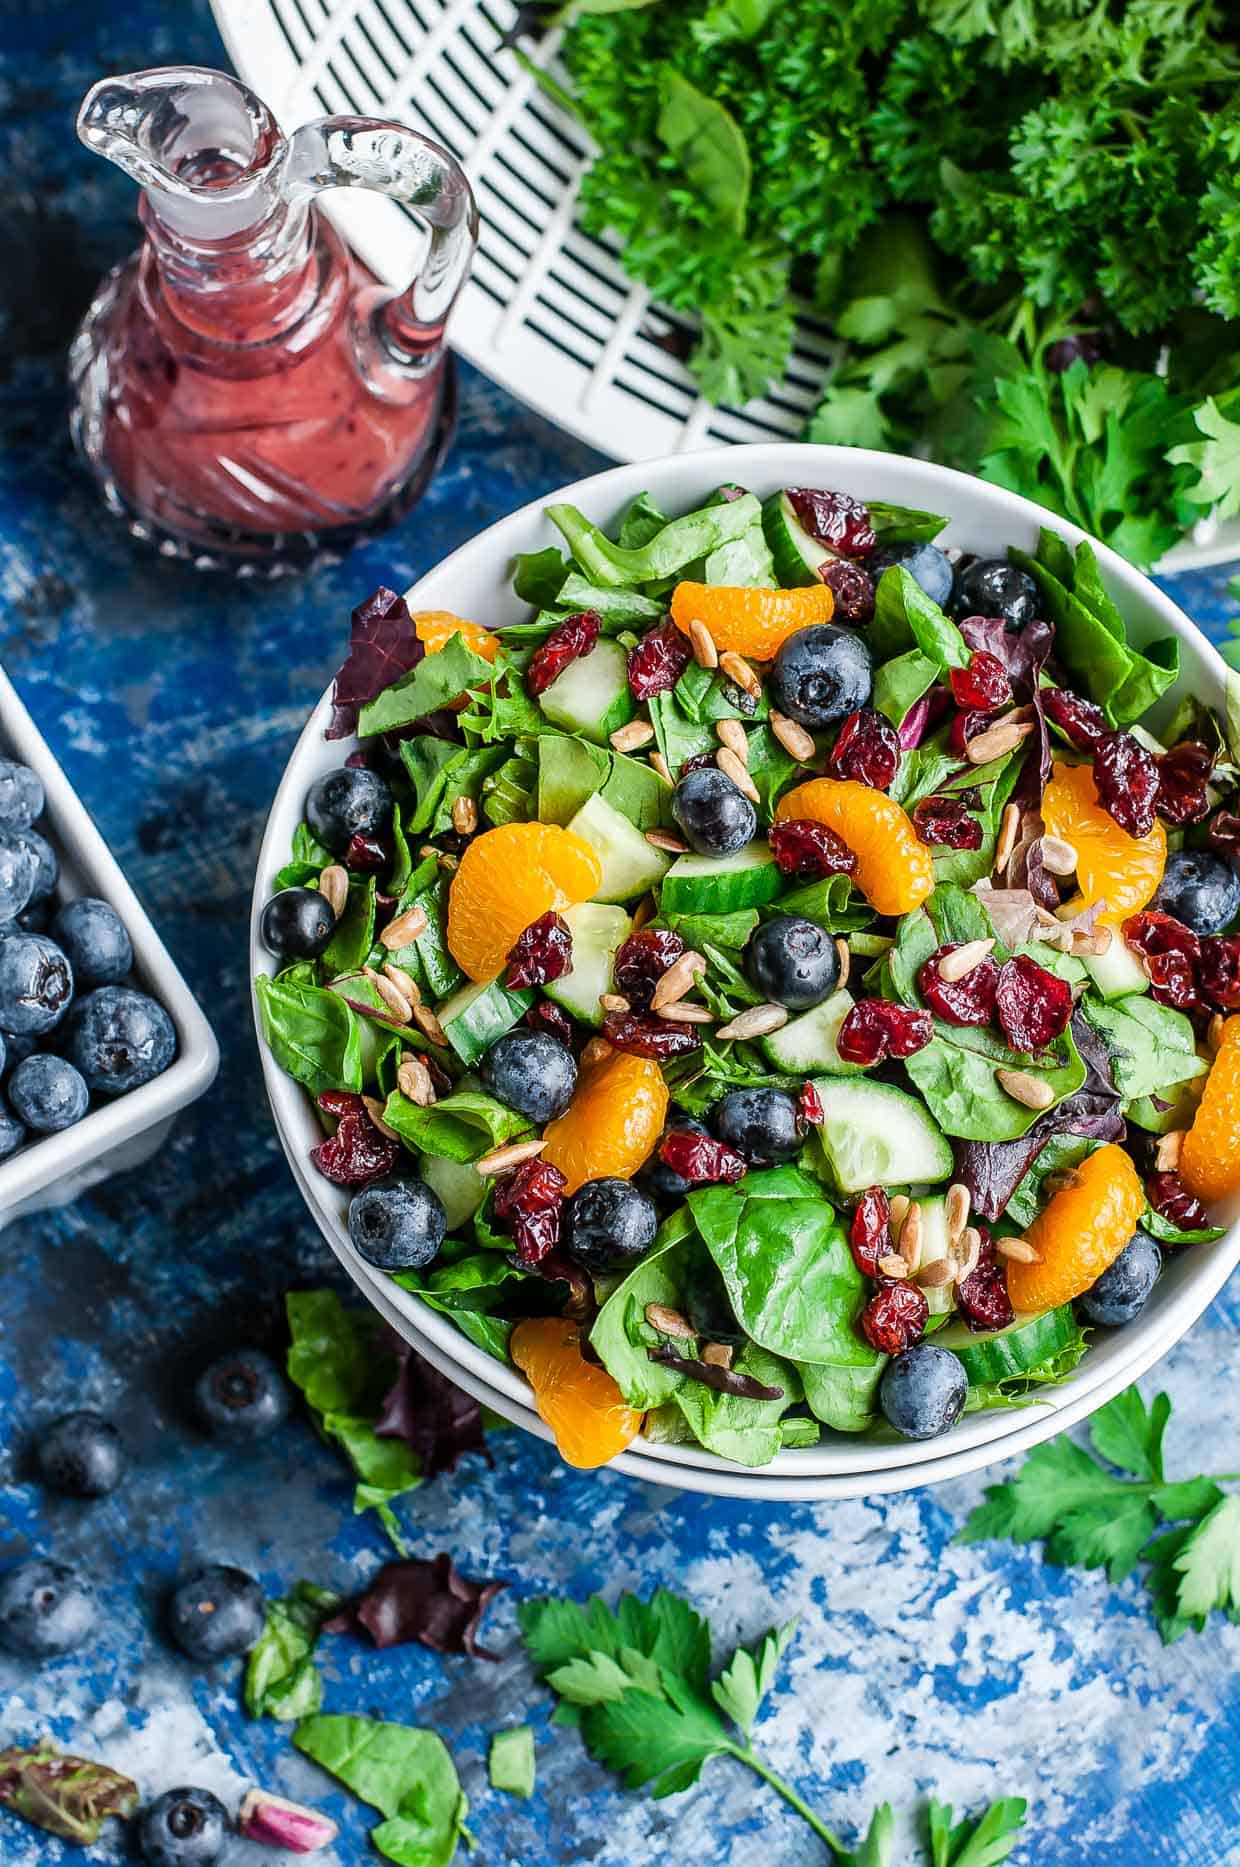 cranberry blueberry spring mix salad blueberry balsamic dressing recipe peasandcrayons 1070